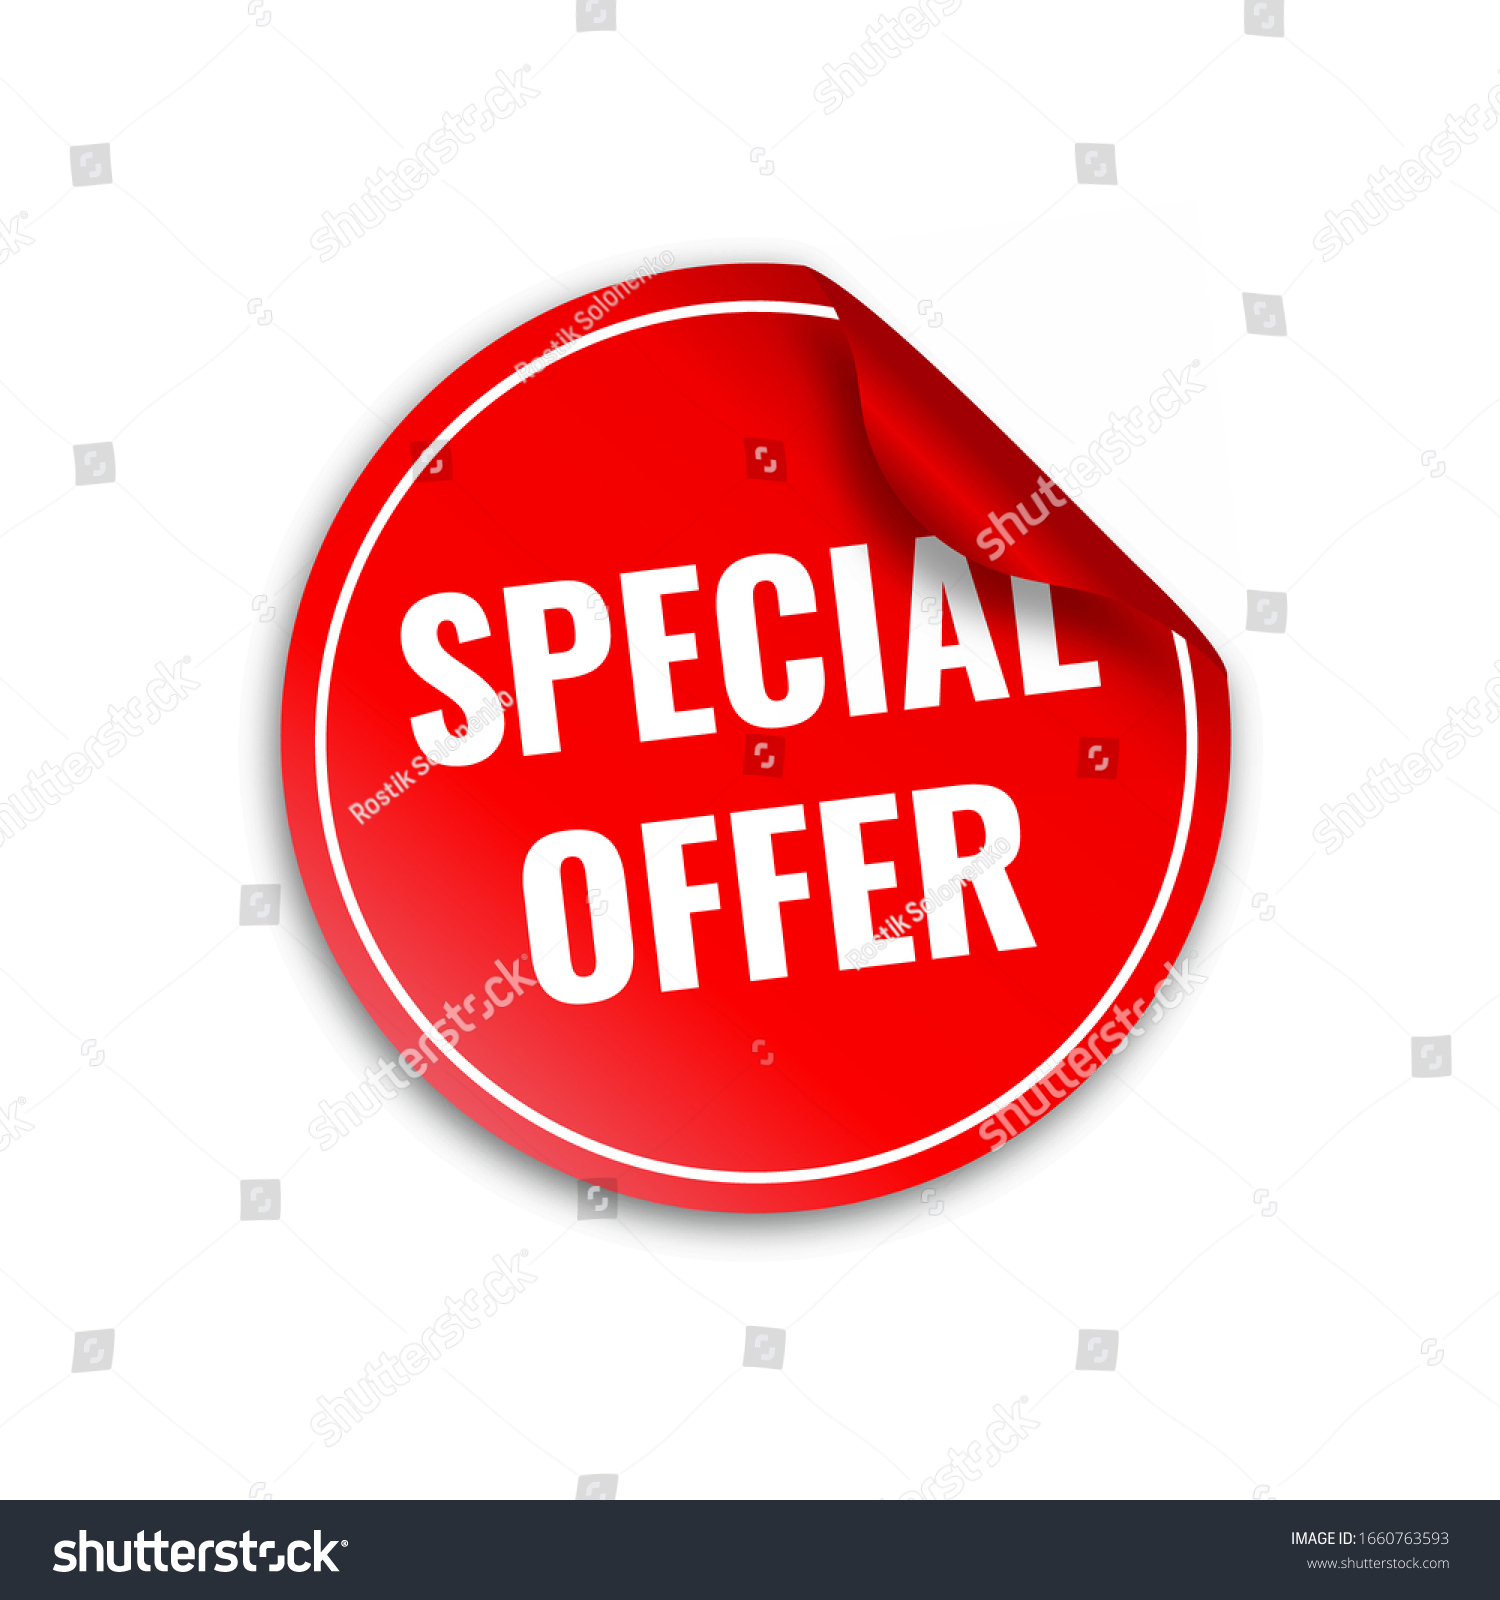 Red banner special offer Vector illustration Isolated on white background eps 10 #1660763593